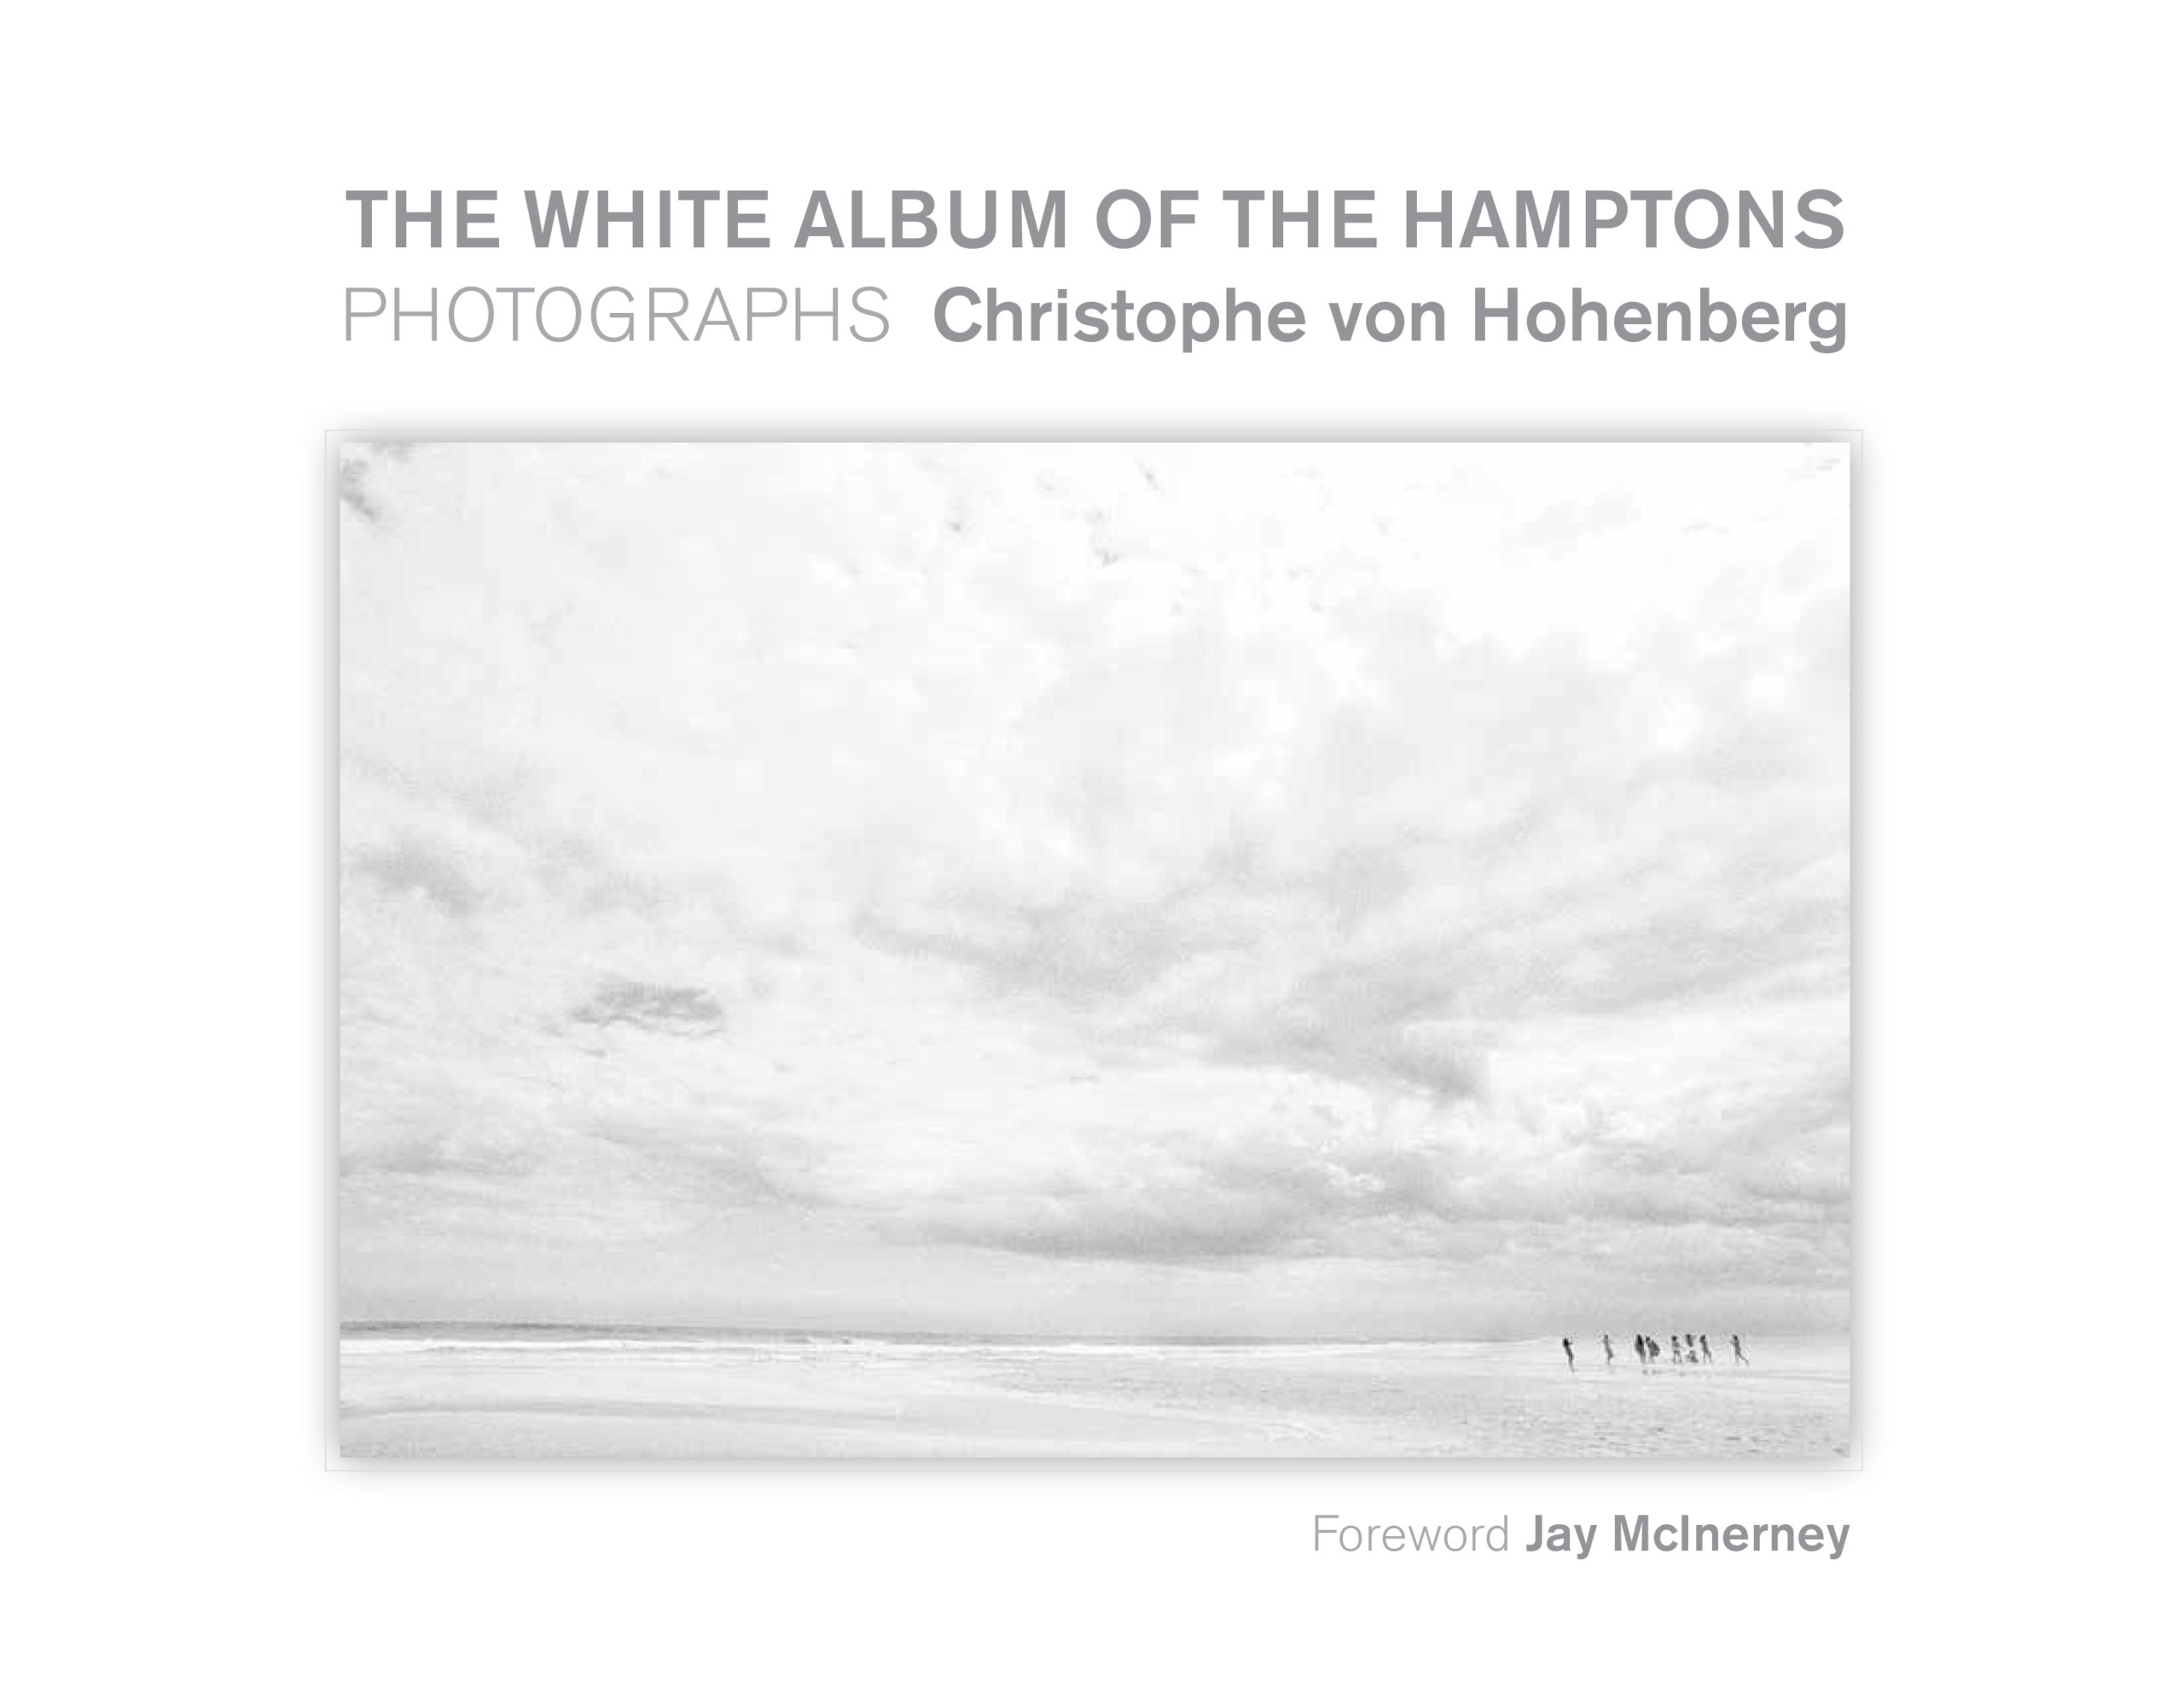 Book cover of "The White Album of the Hamptons" by Christophe von Hohenberg